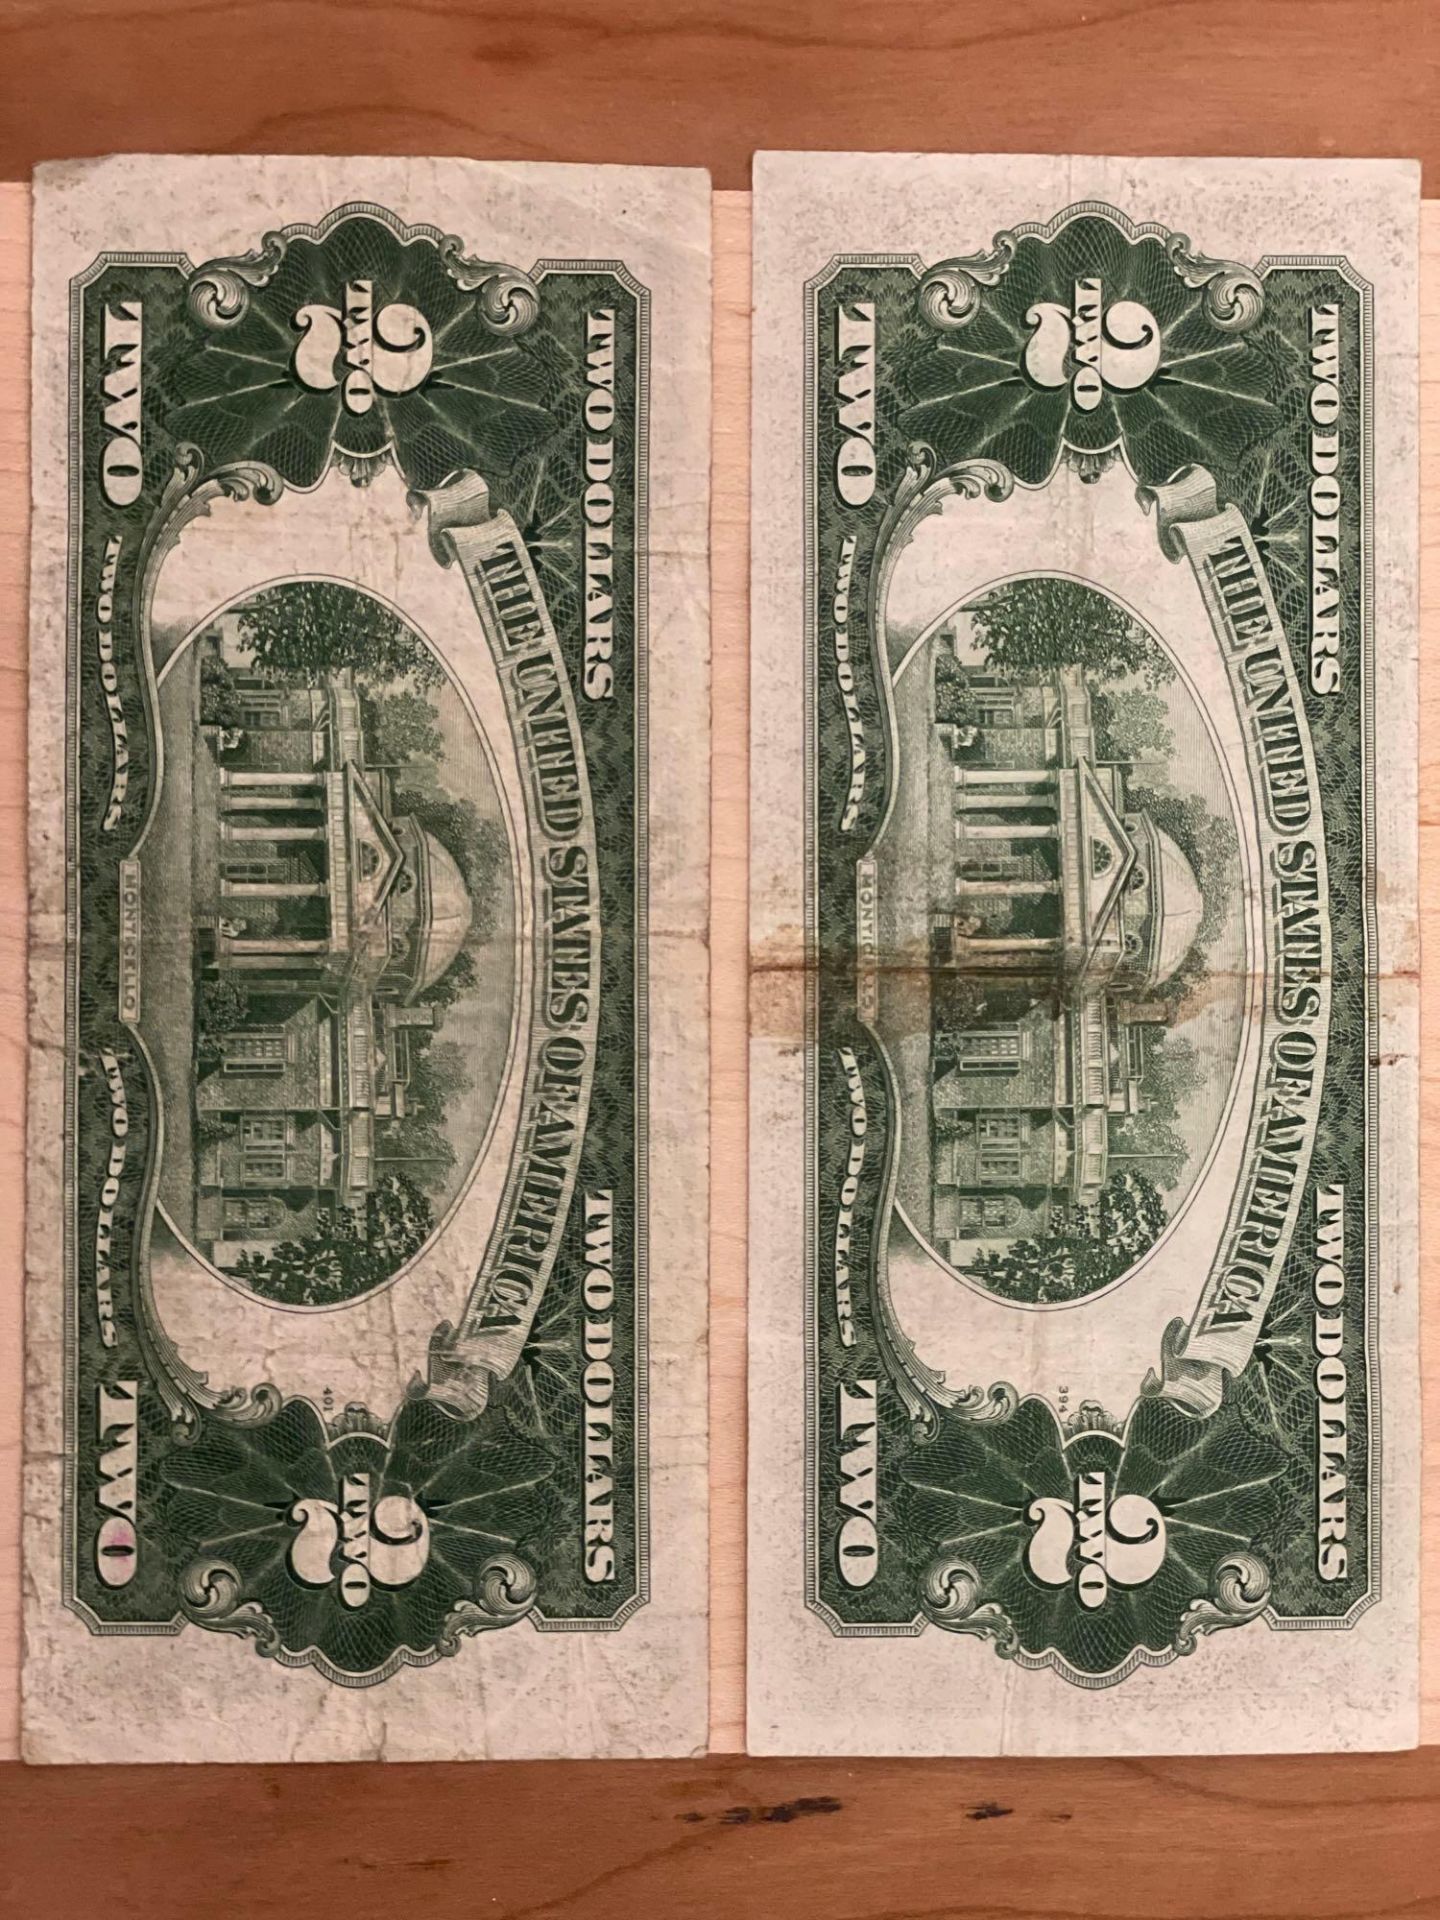 Two $2 Red Seal Bills - Image 3 of 3